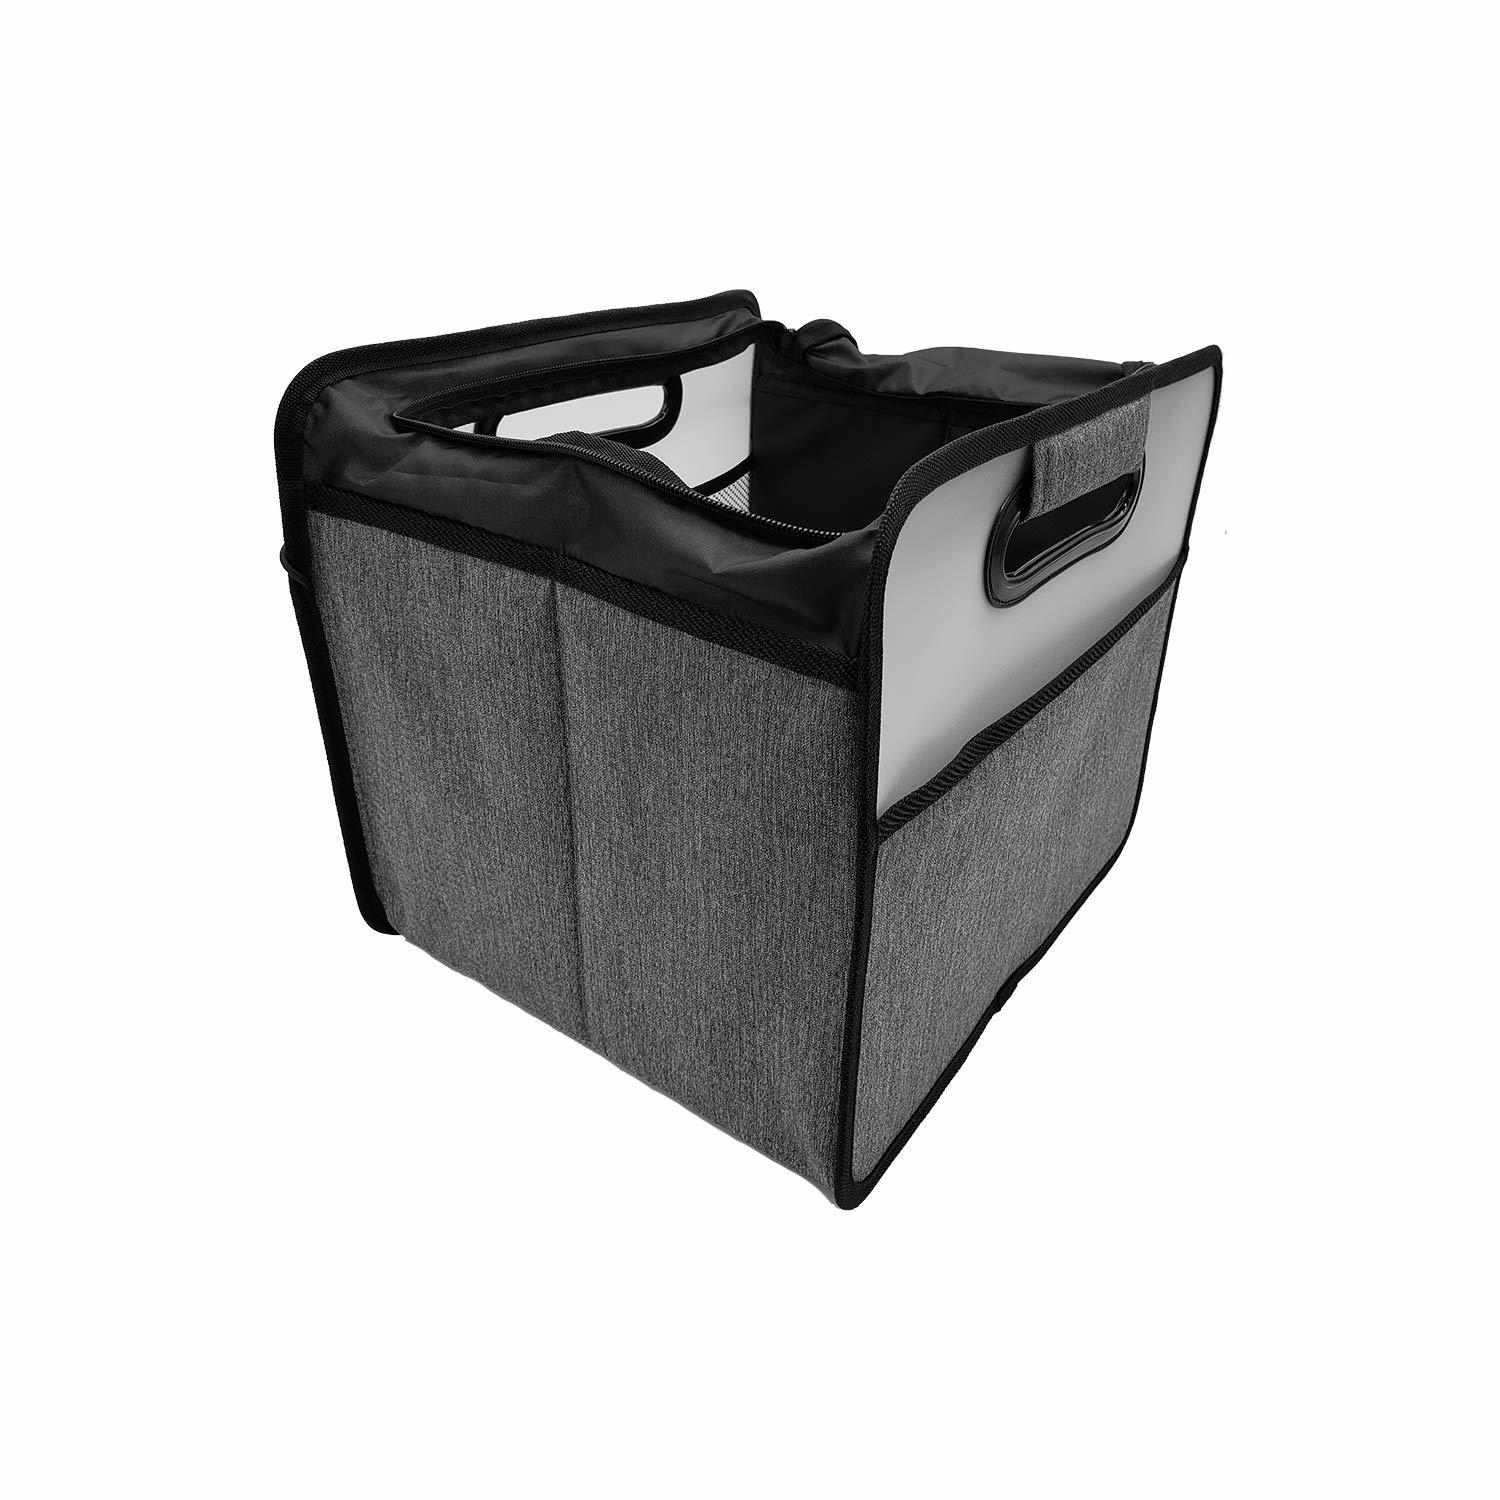 Roane Design - Collapsible Single Bin Container - Perfect for Storage, Picnic - $14.99